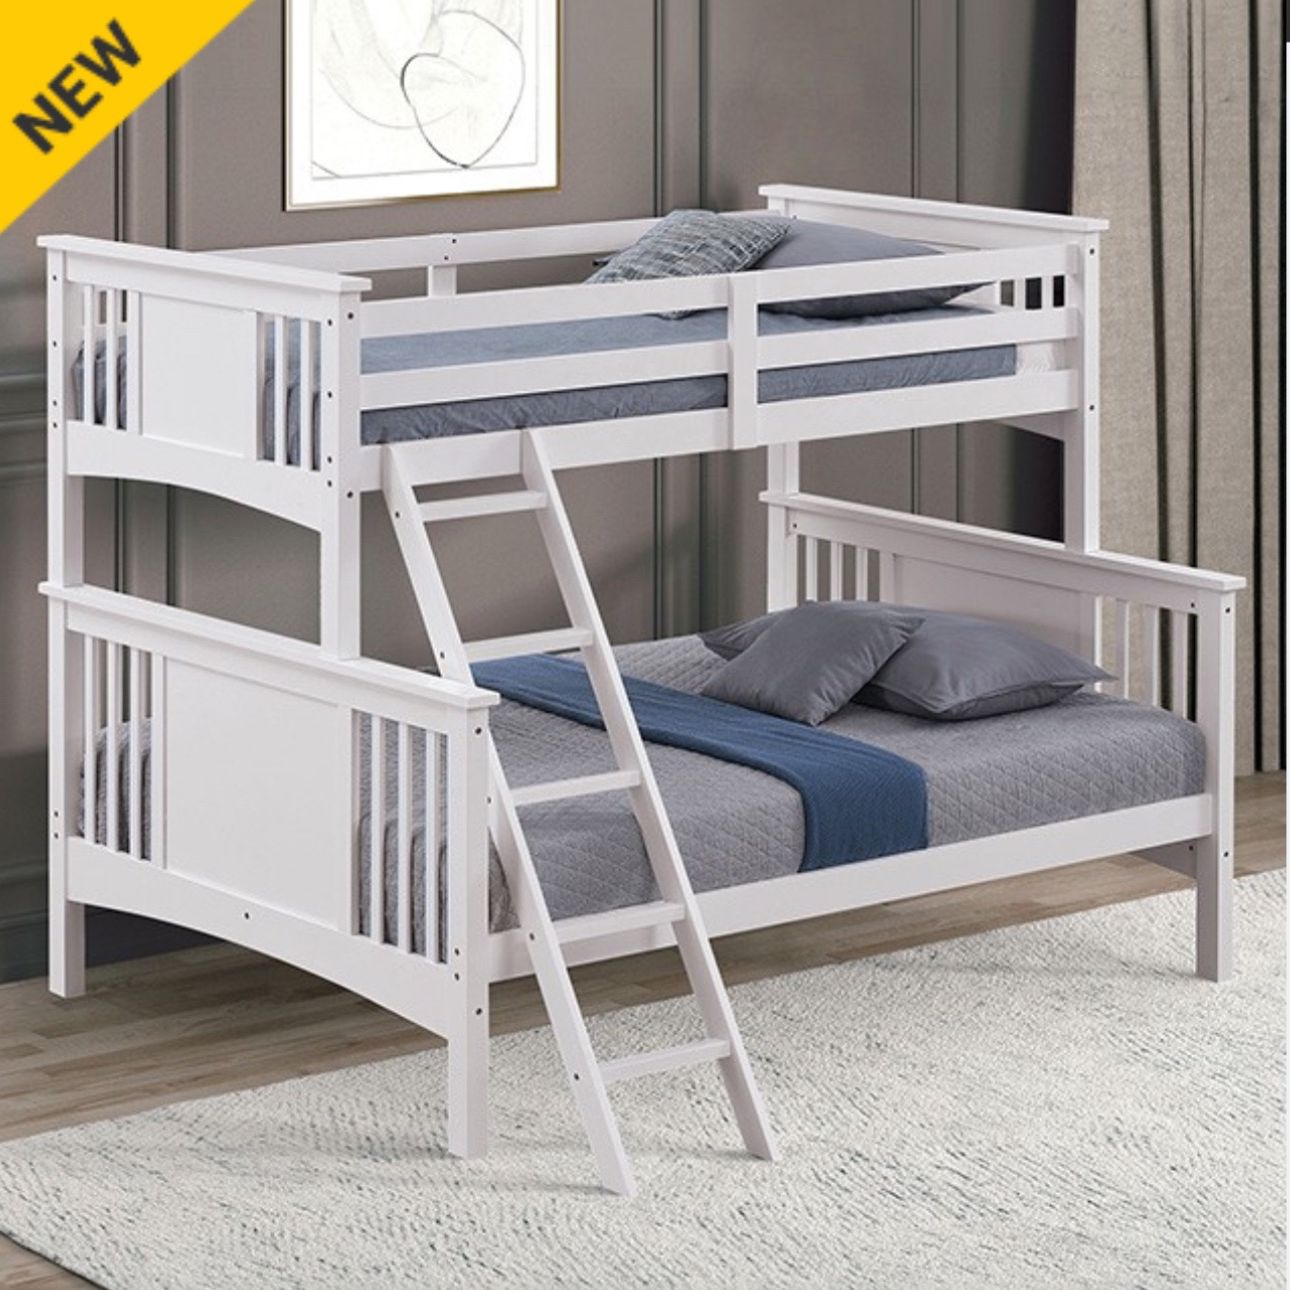 TWIN OVER FULL BUNK BEDS (FREE DELIVERY)